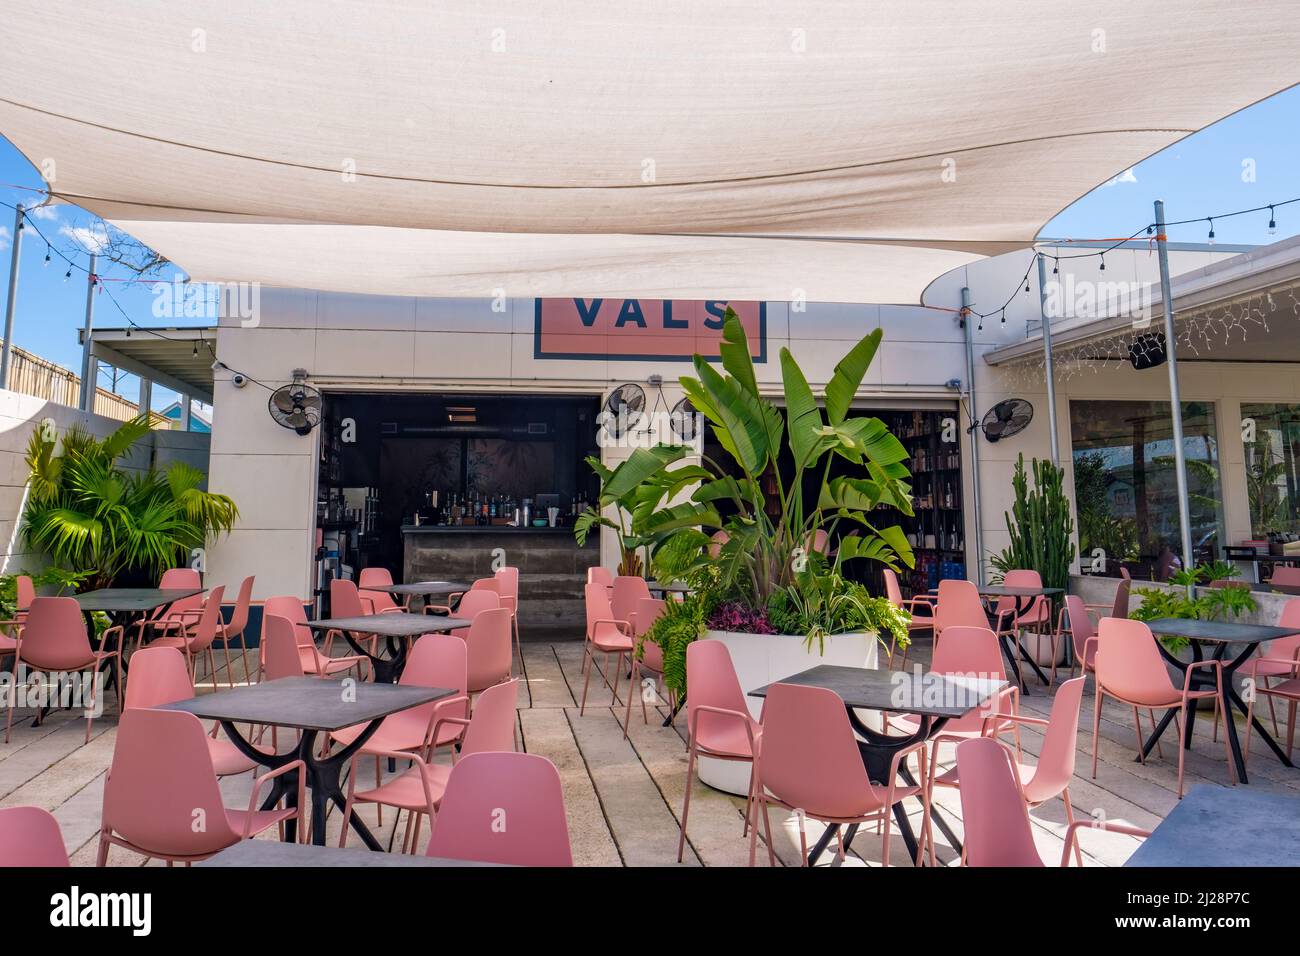 NEW ORLEANS, LA, USA - MARCH 24, 2022: Popular Val's Restaurant on Freret Street Stock Photo